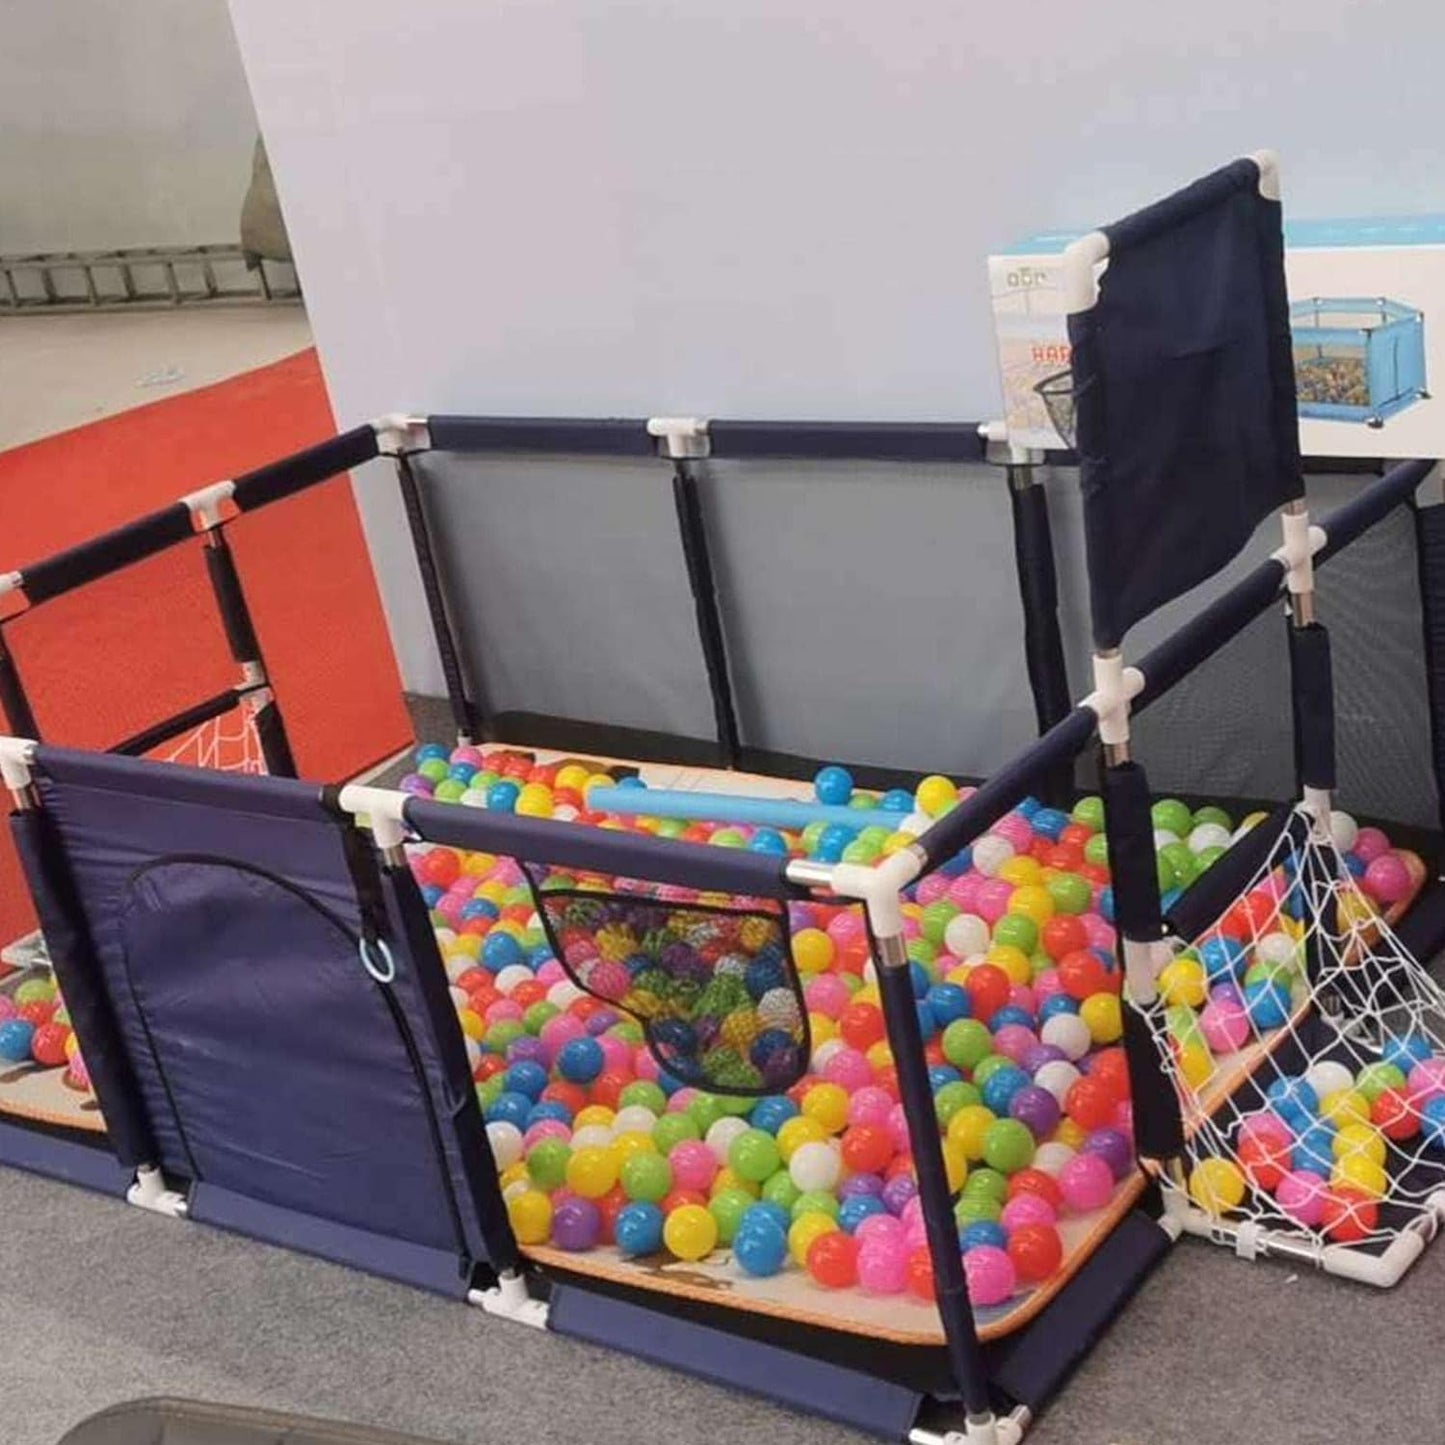 Portable Baby Ball Pit Tent Playpen Play Fence Baby Playpen with Basketball Hoop